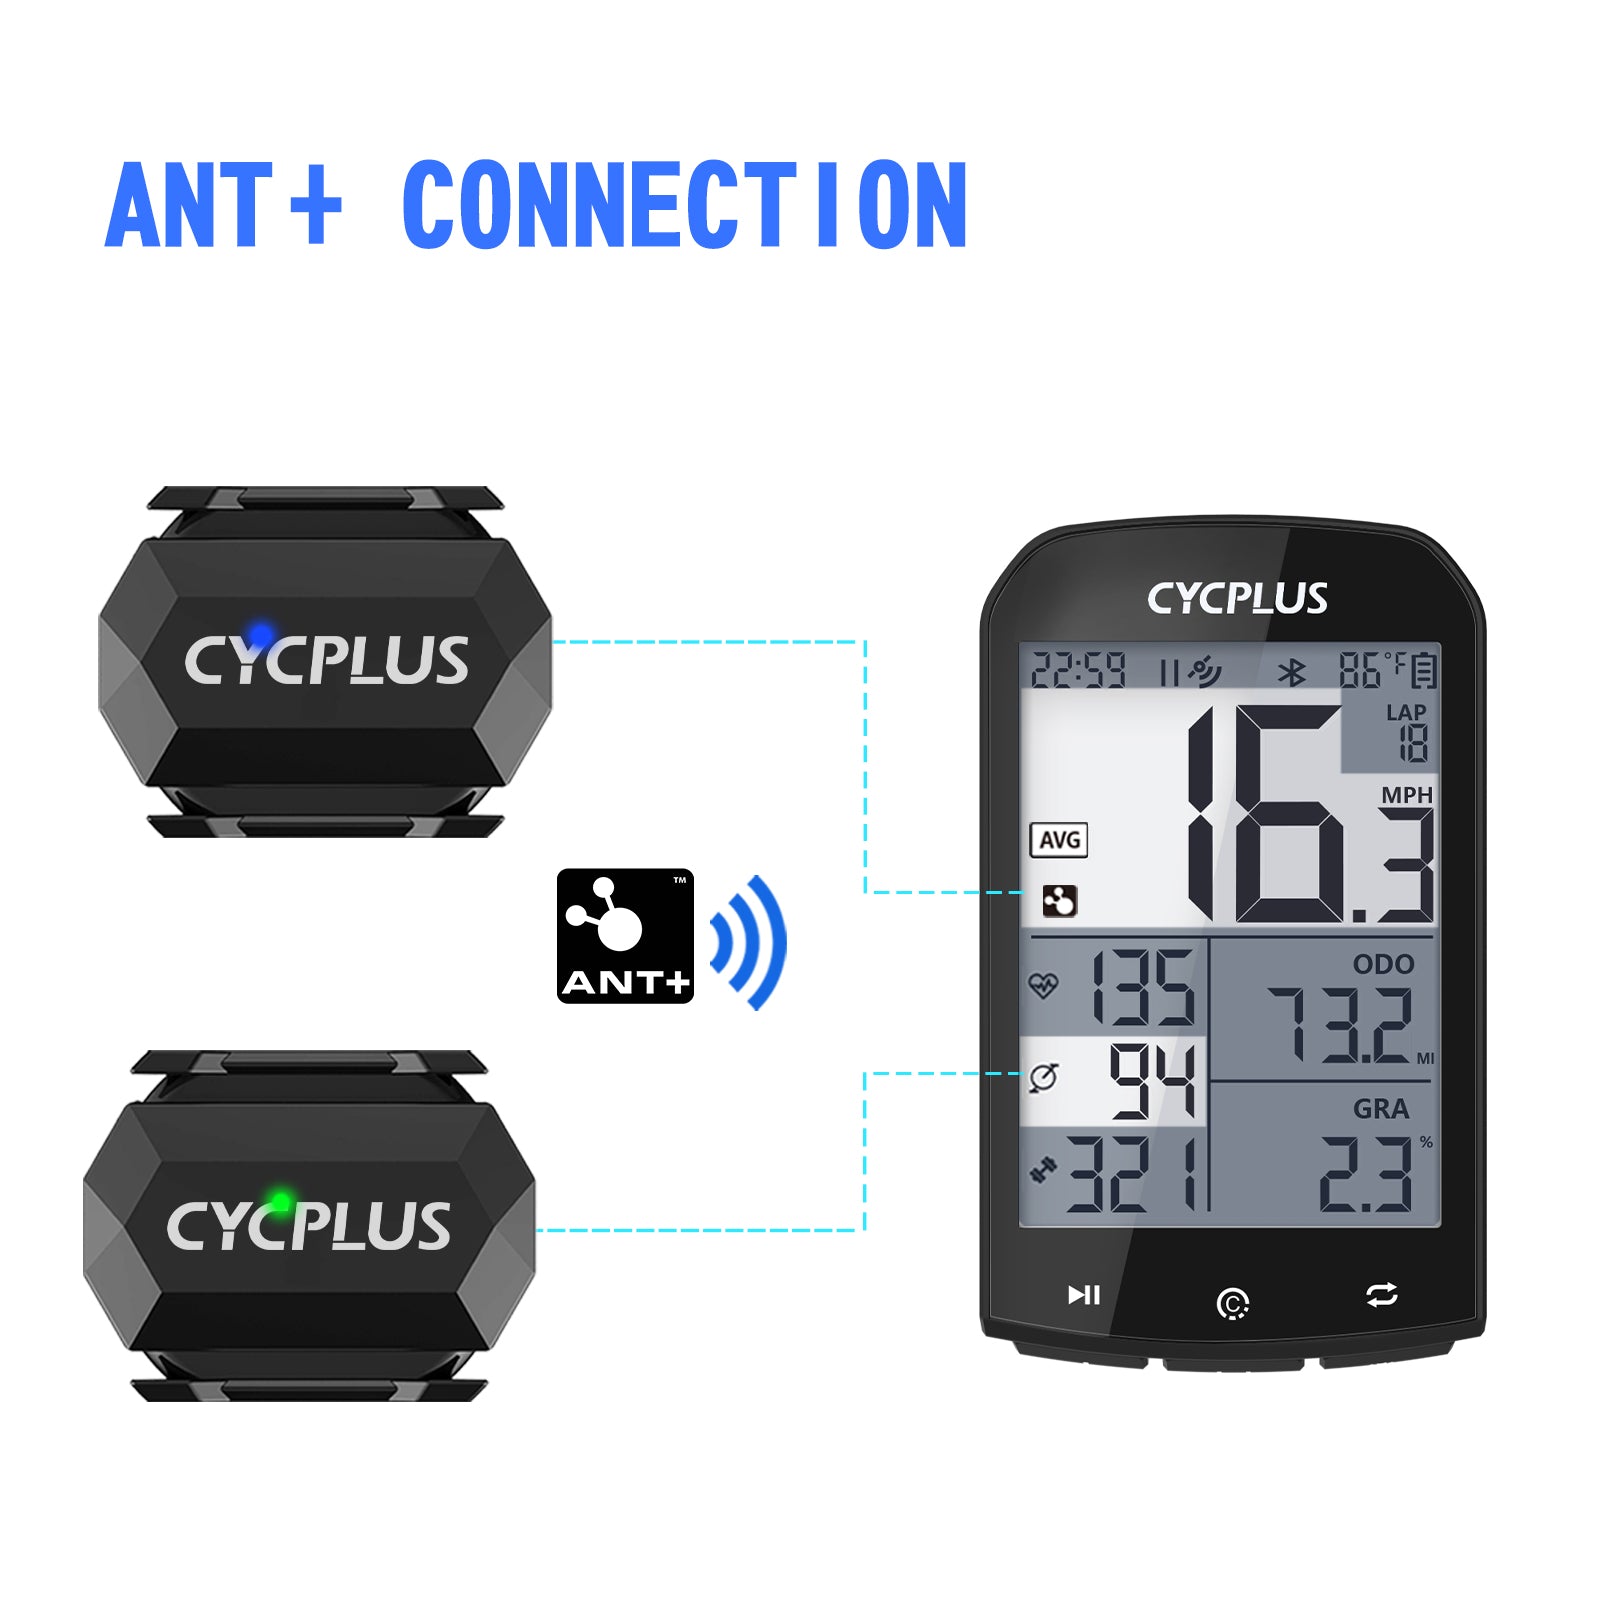 CYCPLUS C3 ANT+ Connection